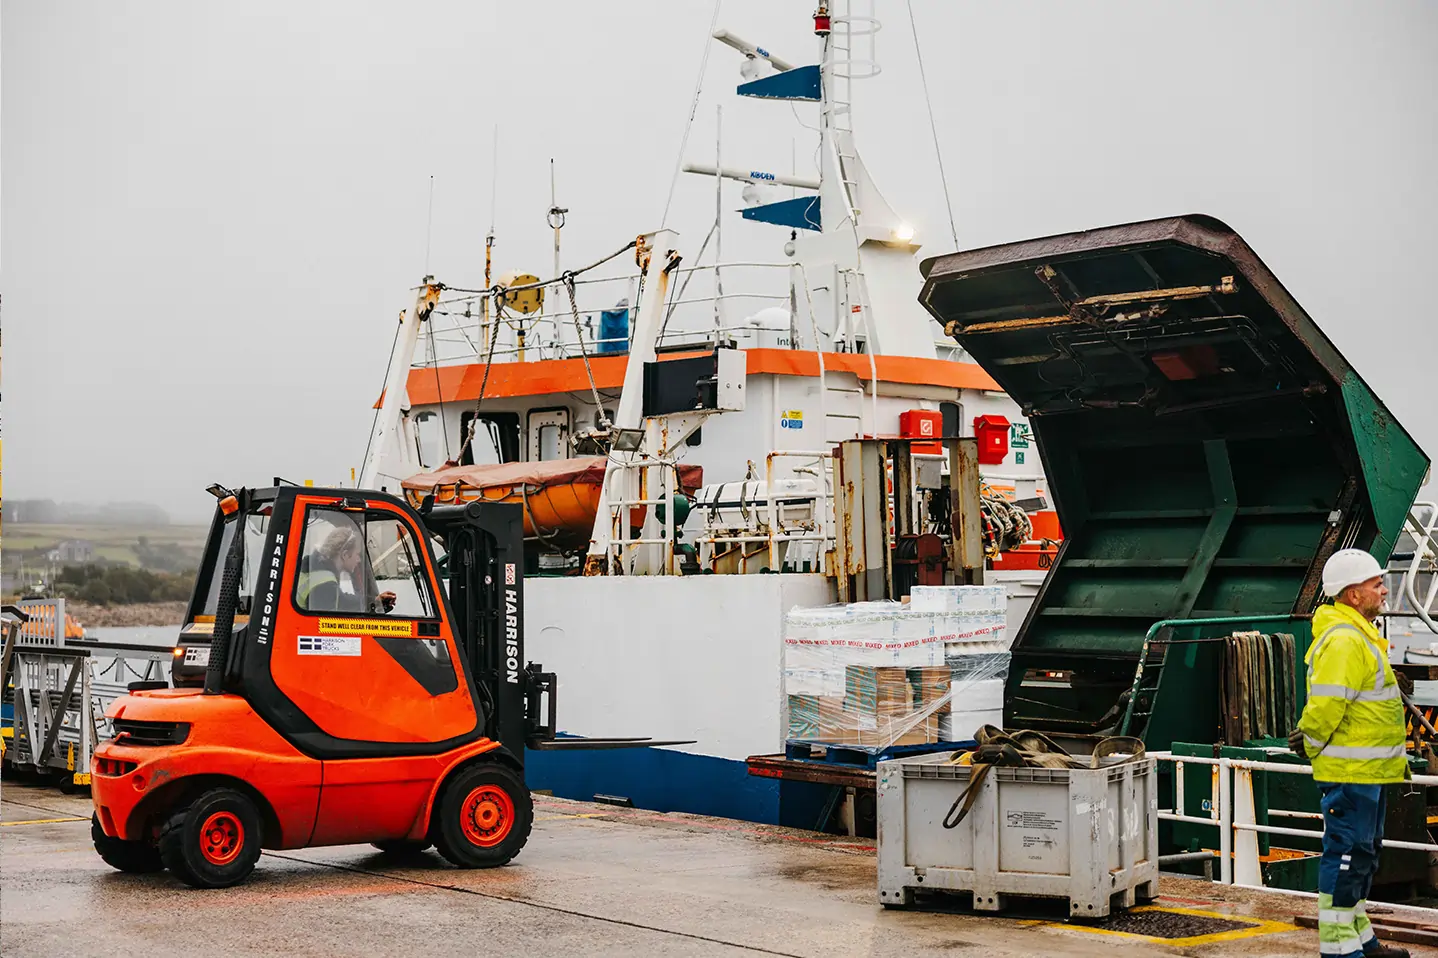 Forklift Truck unloading freight from the Gry Maritha, St Mary's, Isles of Scilly